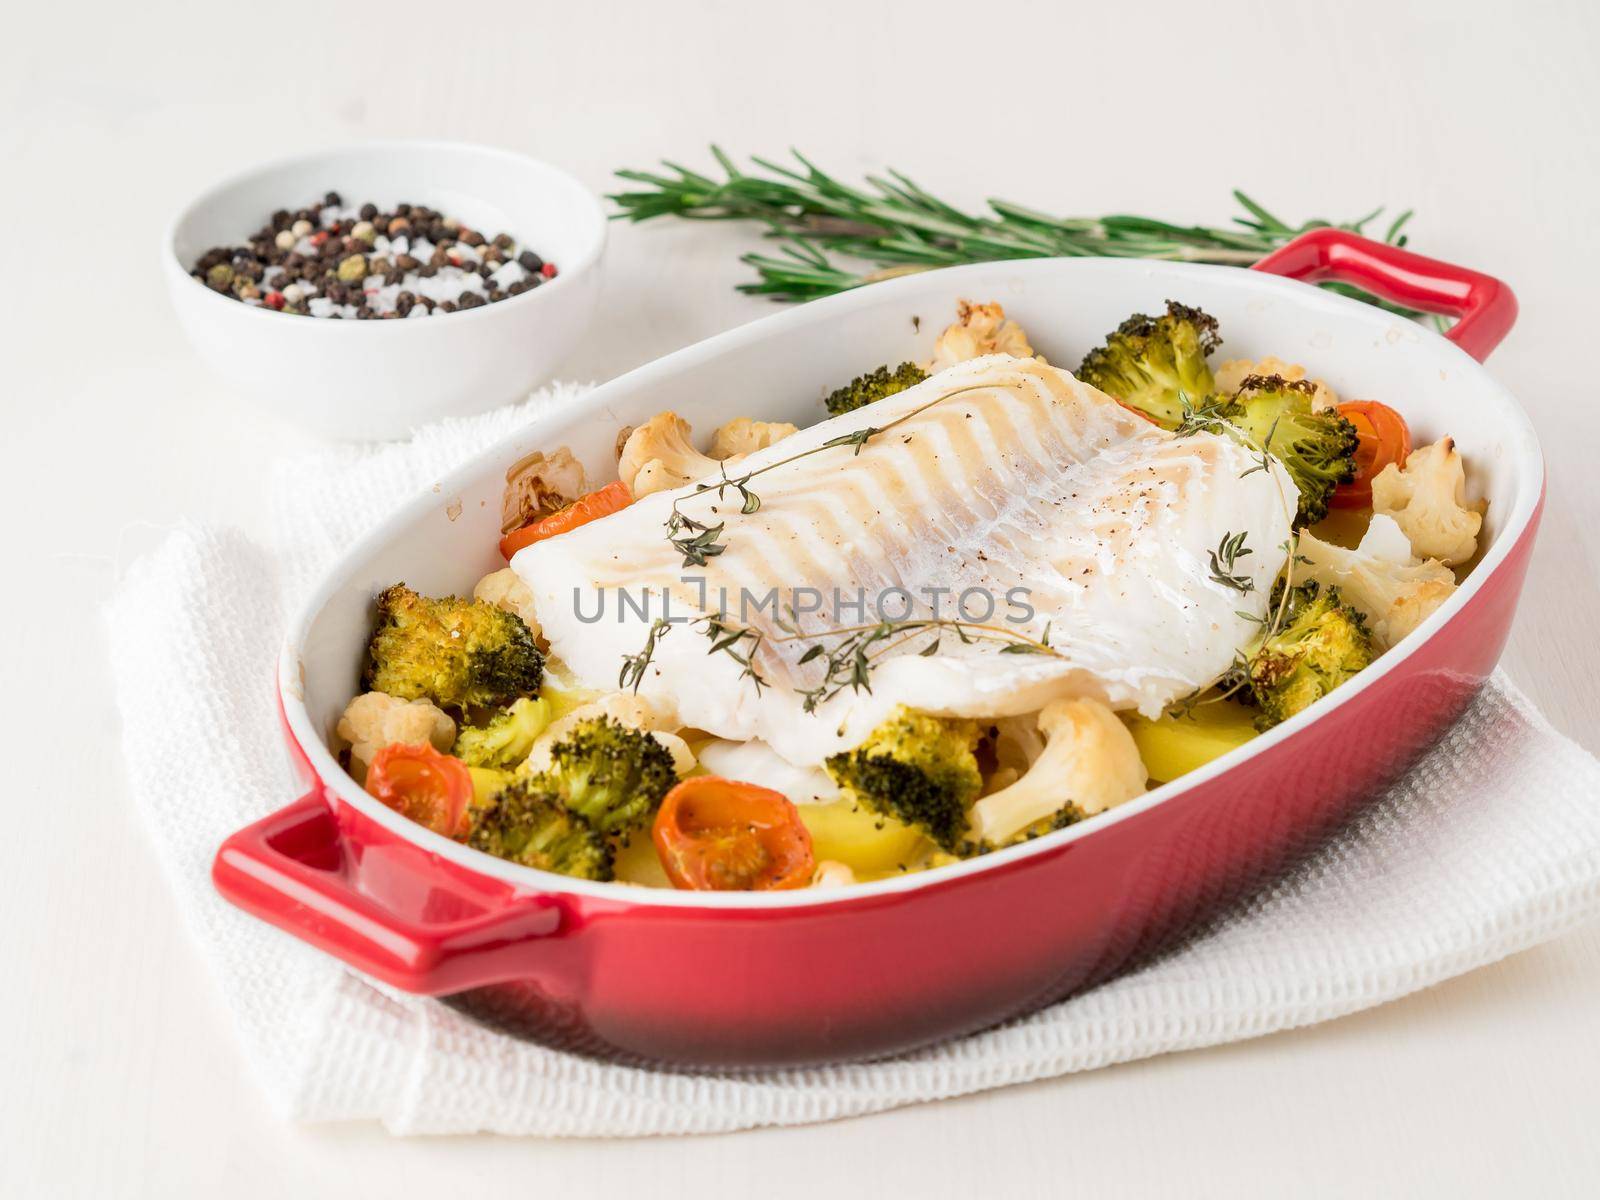 Fish cod baked in the oven with vegetables - healthy diet healthy food. Light white wooden background, side view.